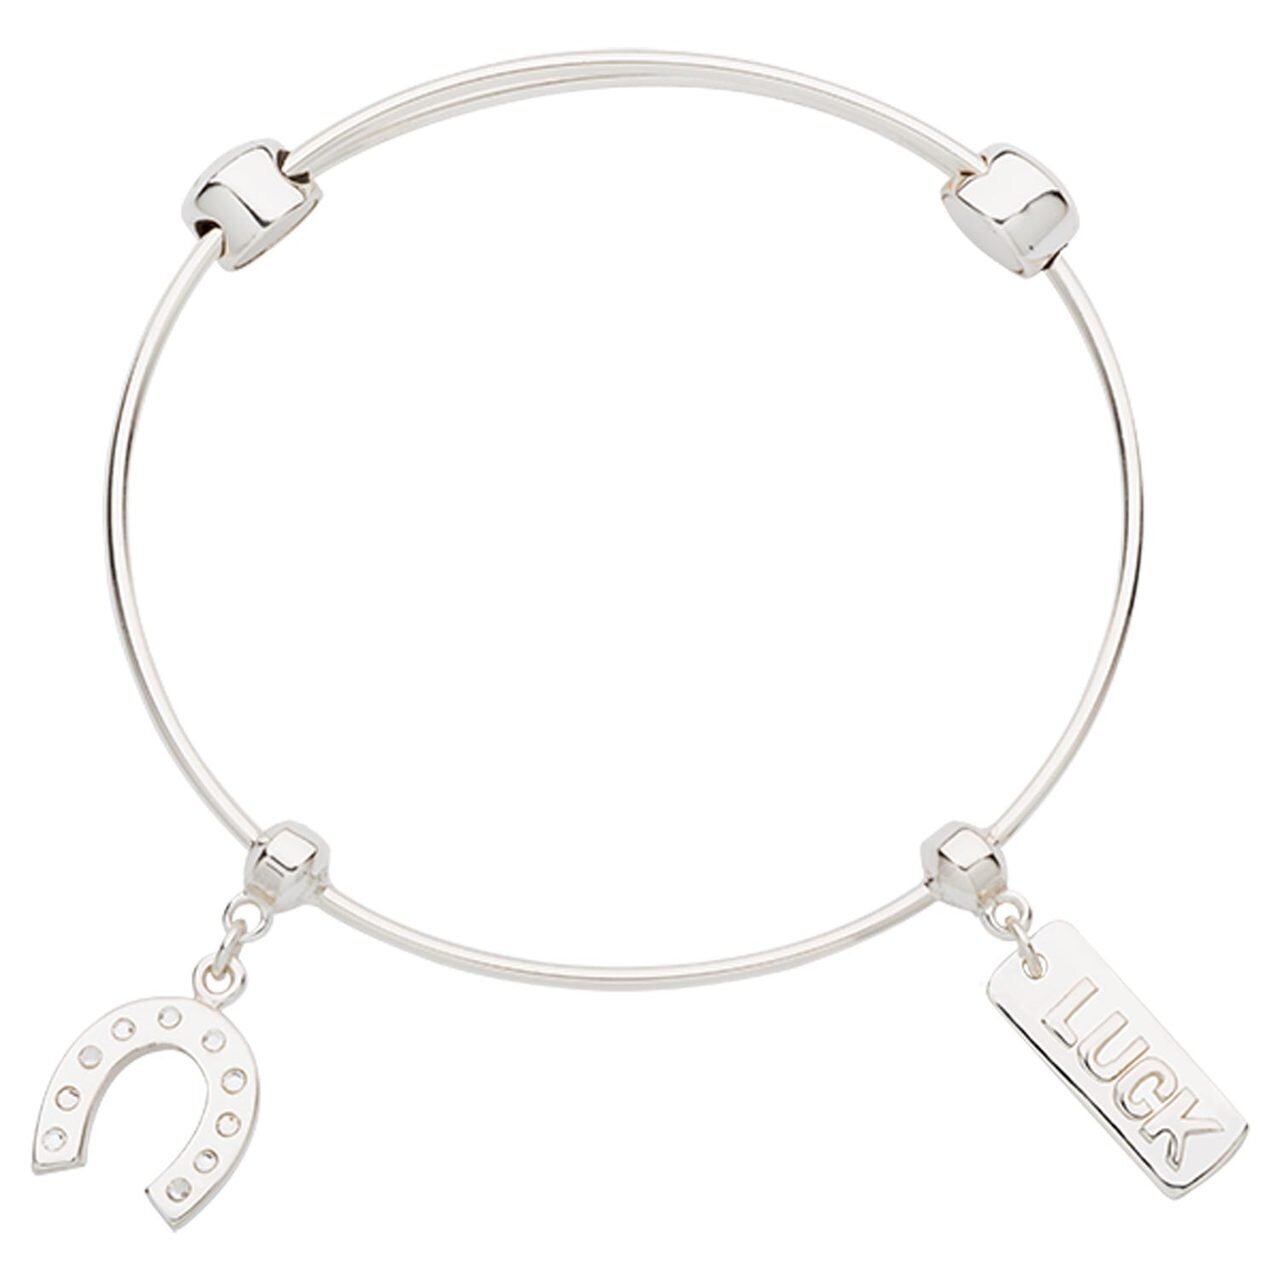 Nikki Lissoni Charm Bangle with Two Fixed Charms Lucky Horseshoe Luck Silver-plated 17cm B1160S17